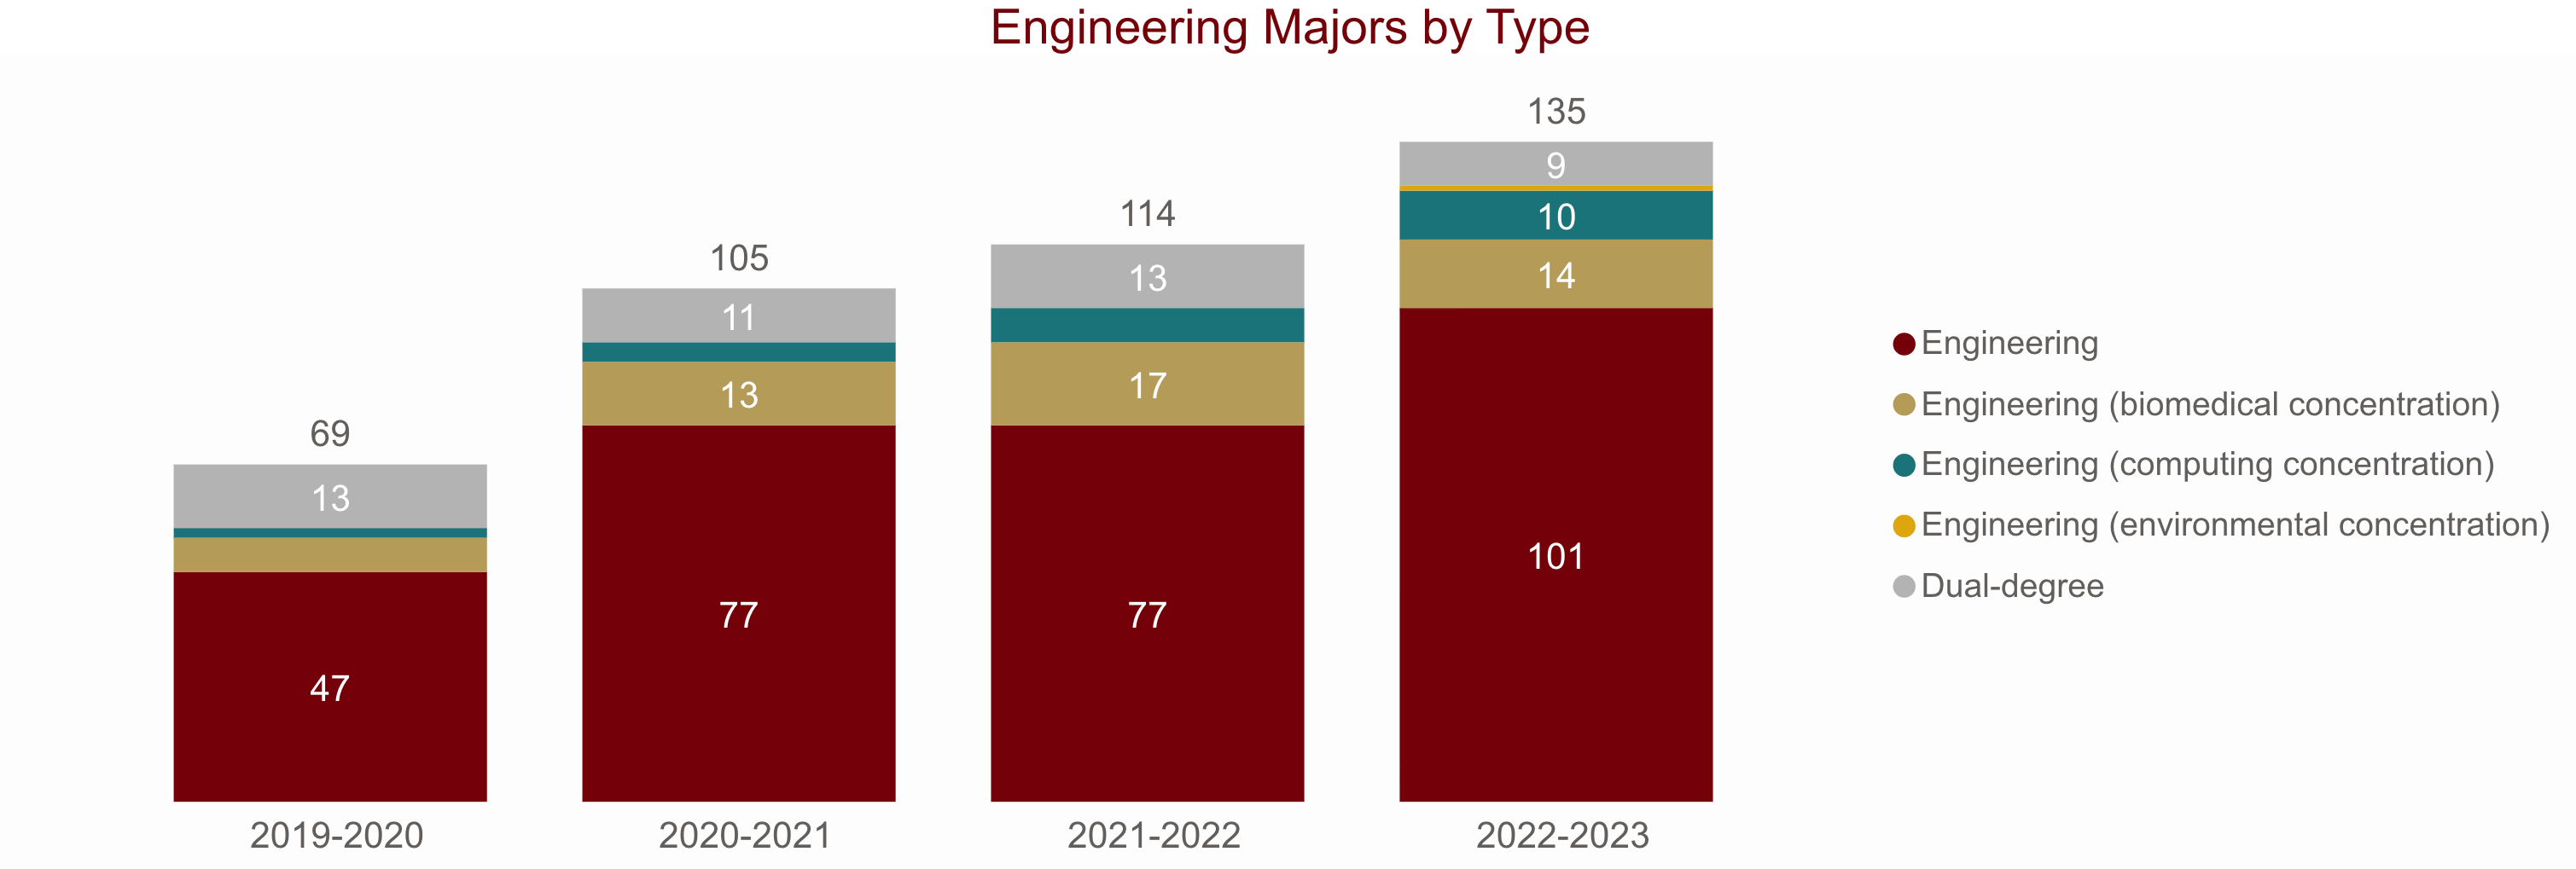 Bar chart showing engineering majors by type